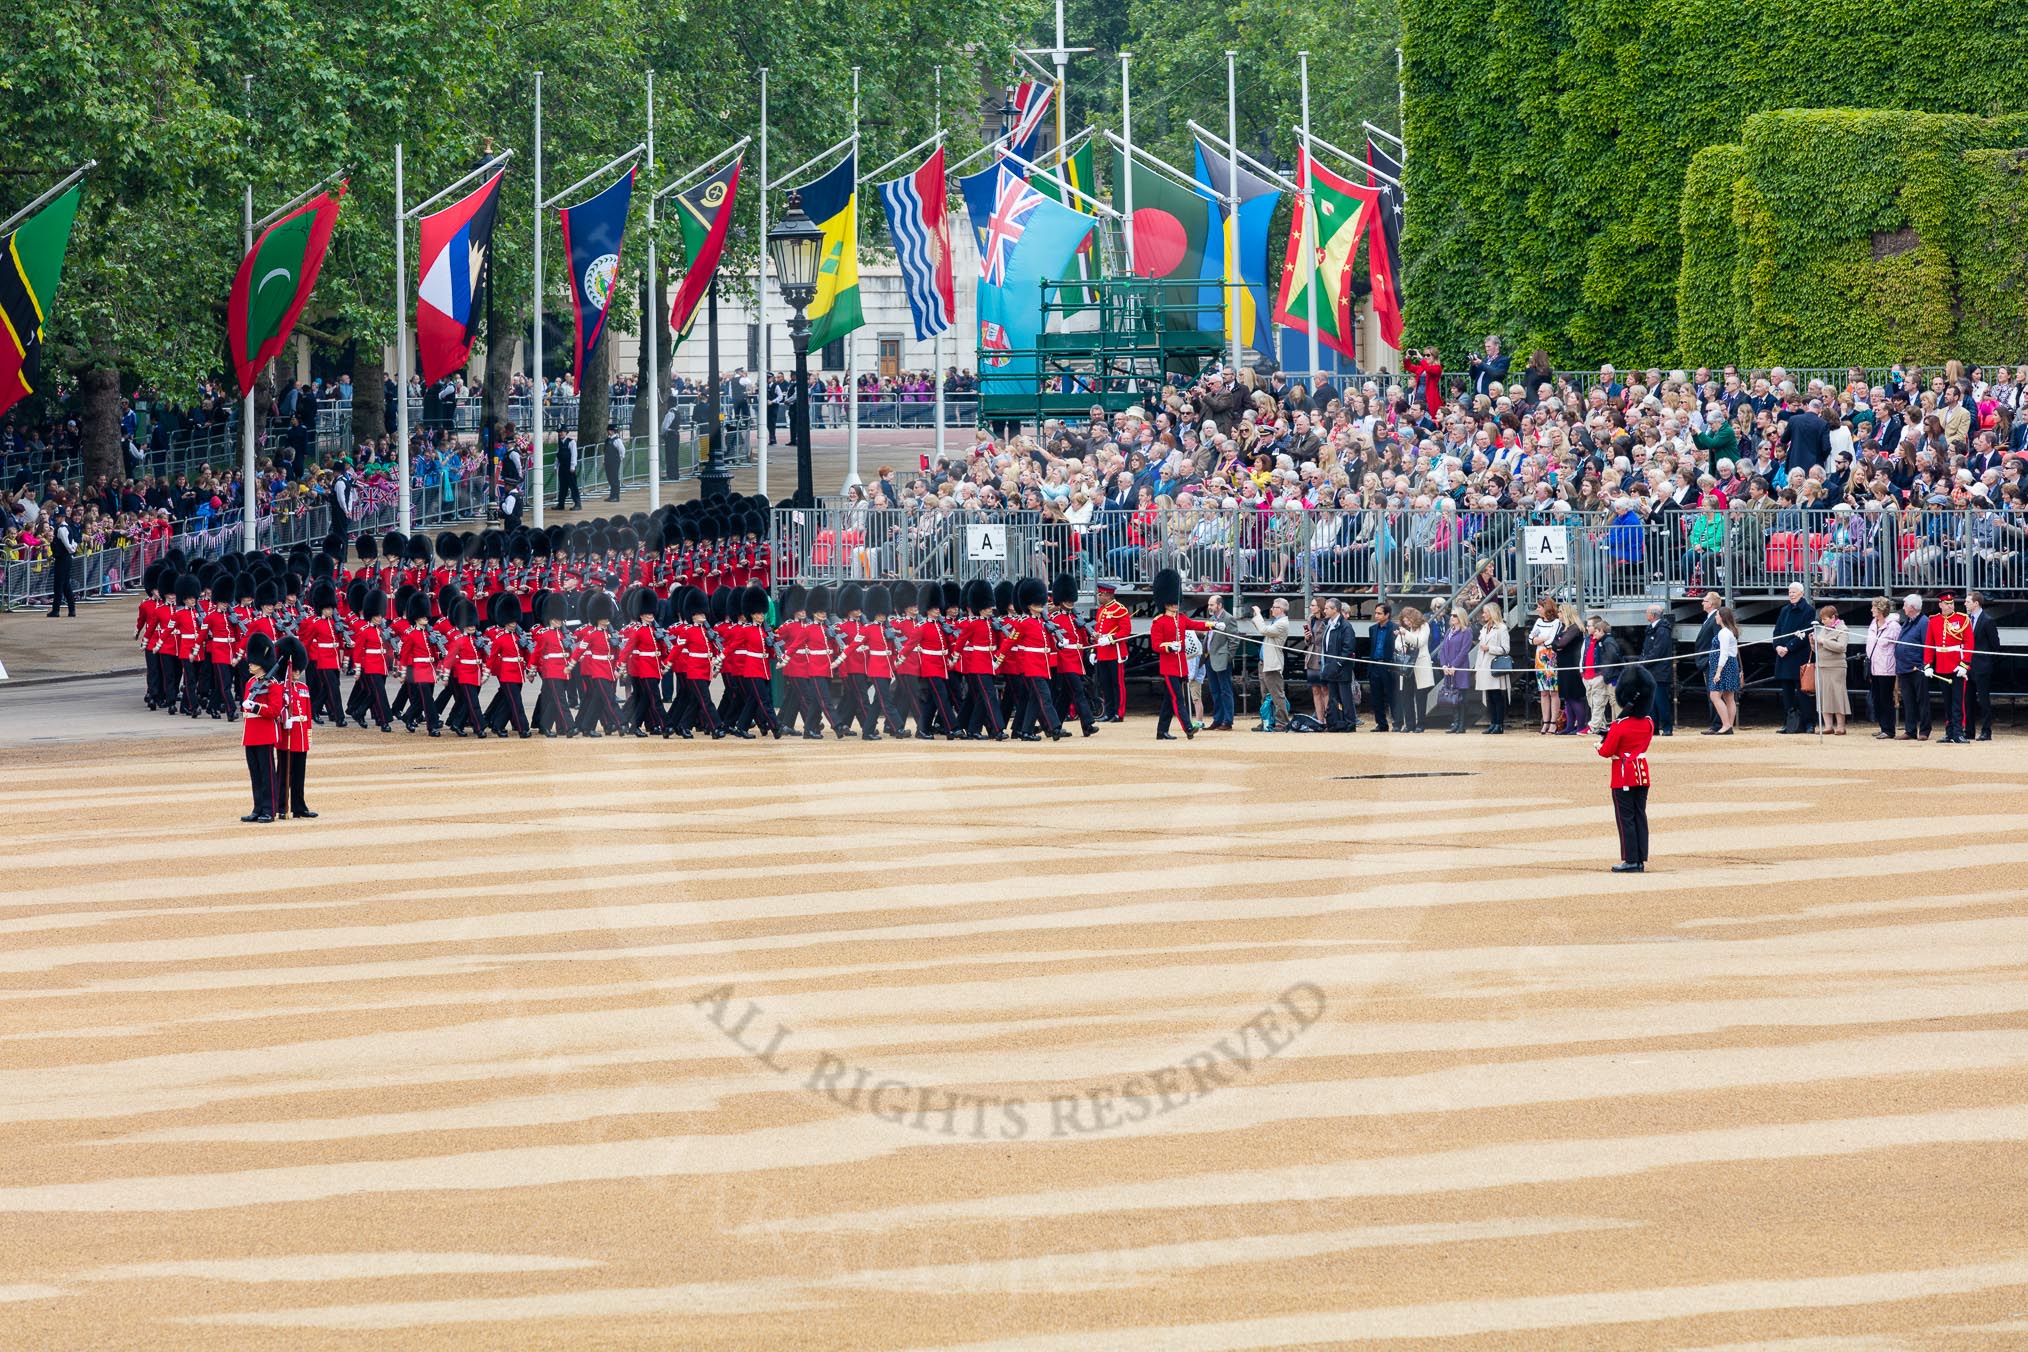 The Colonel's Review 2016.
Horse Guards Parade, Westminster,
London,

United Kingdom,
on 04 June 2016 at 10:25, image #60